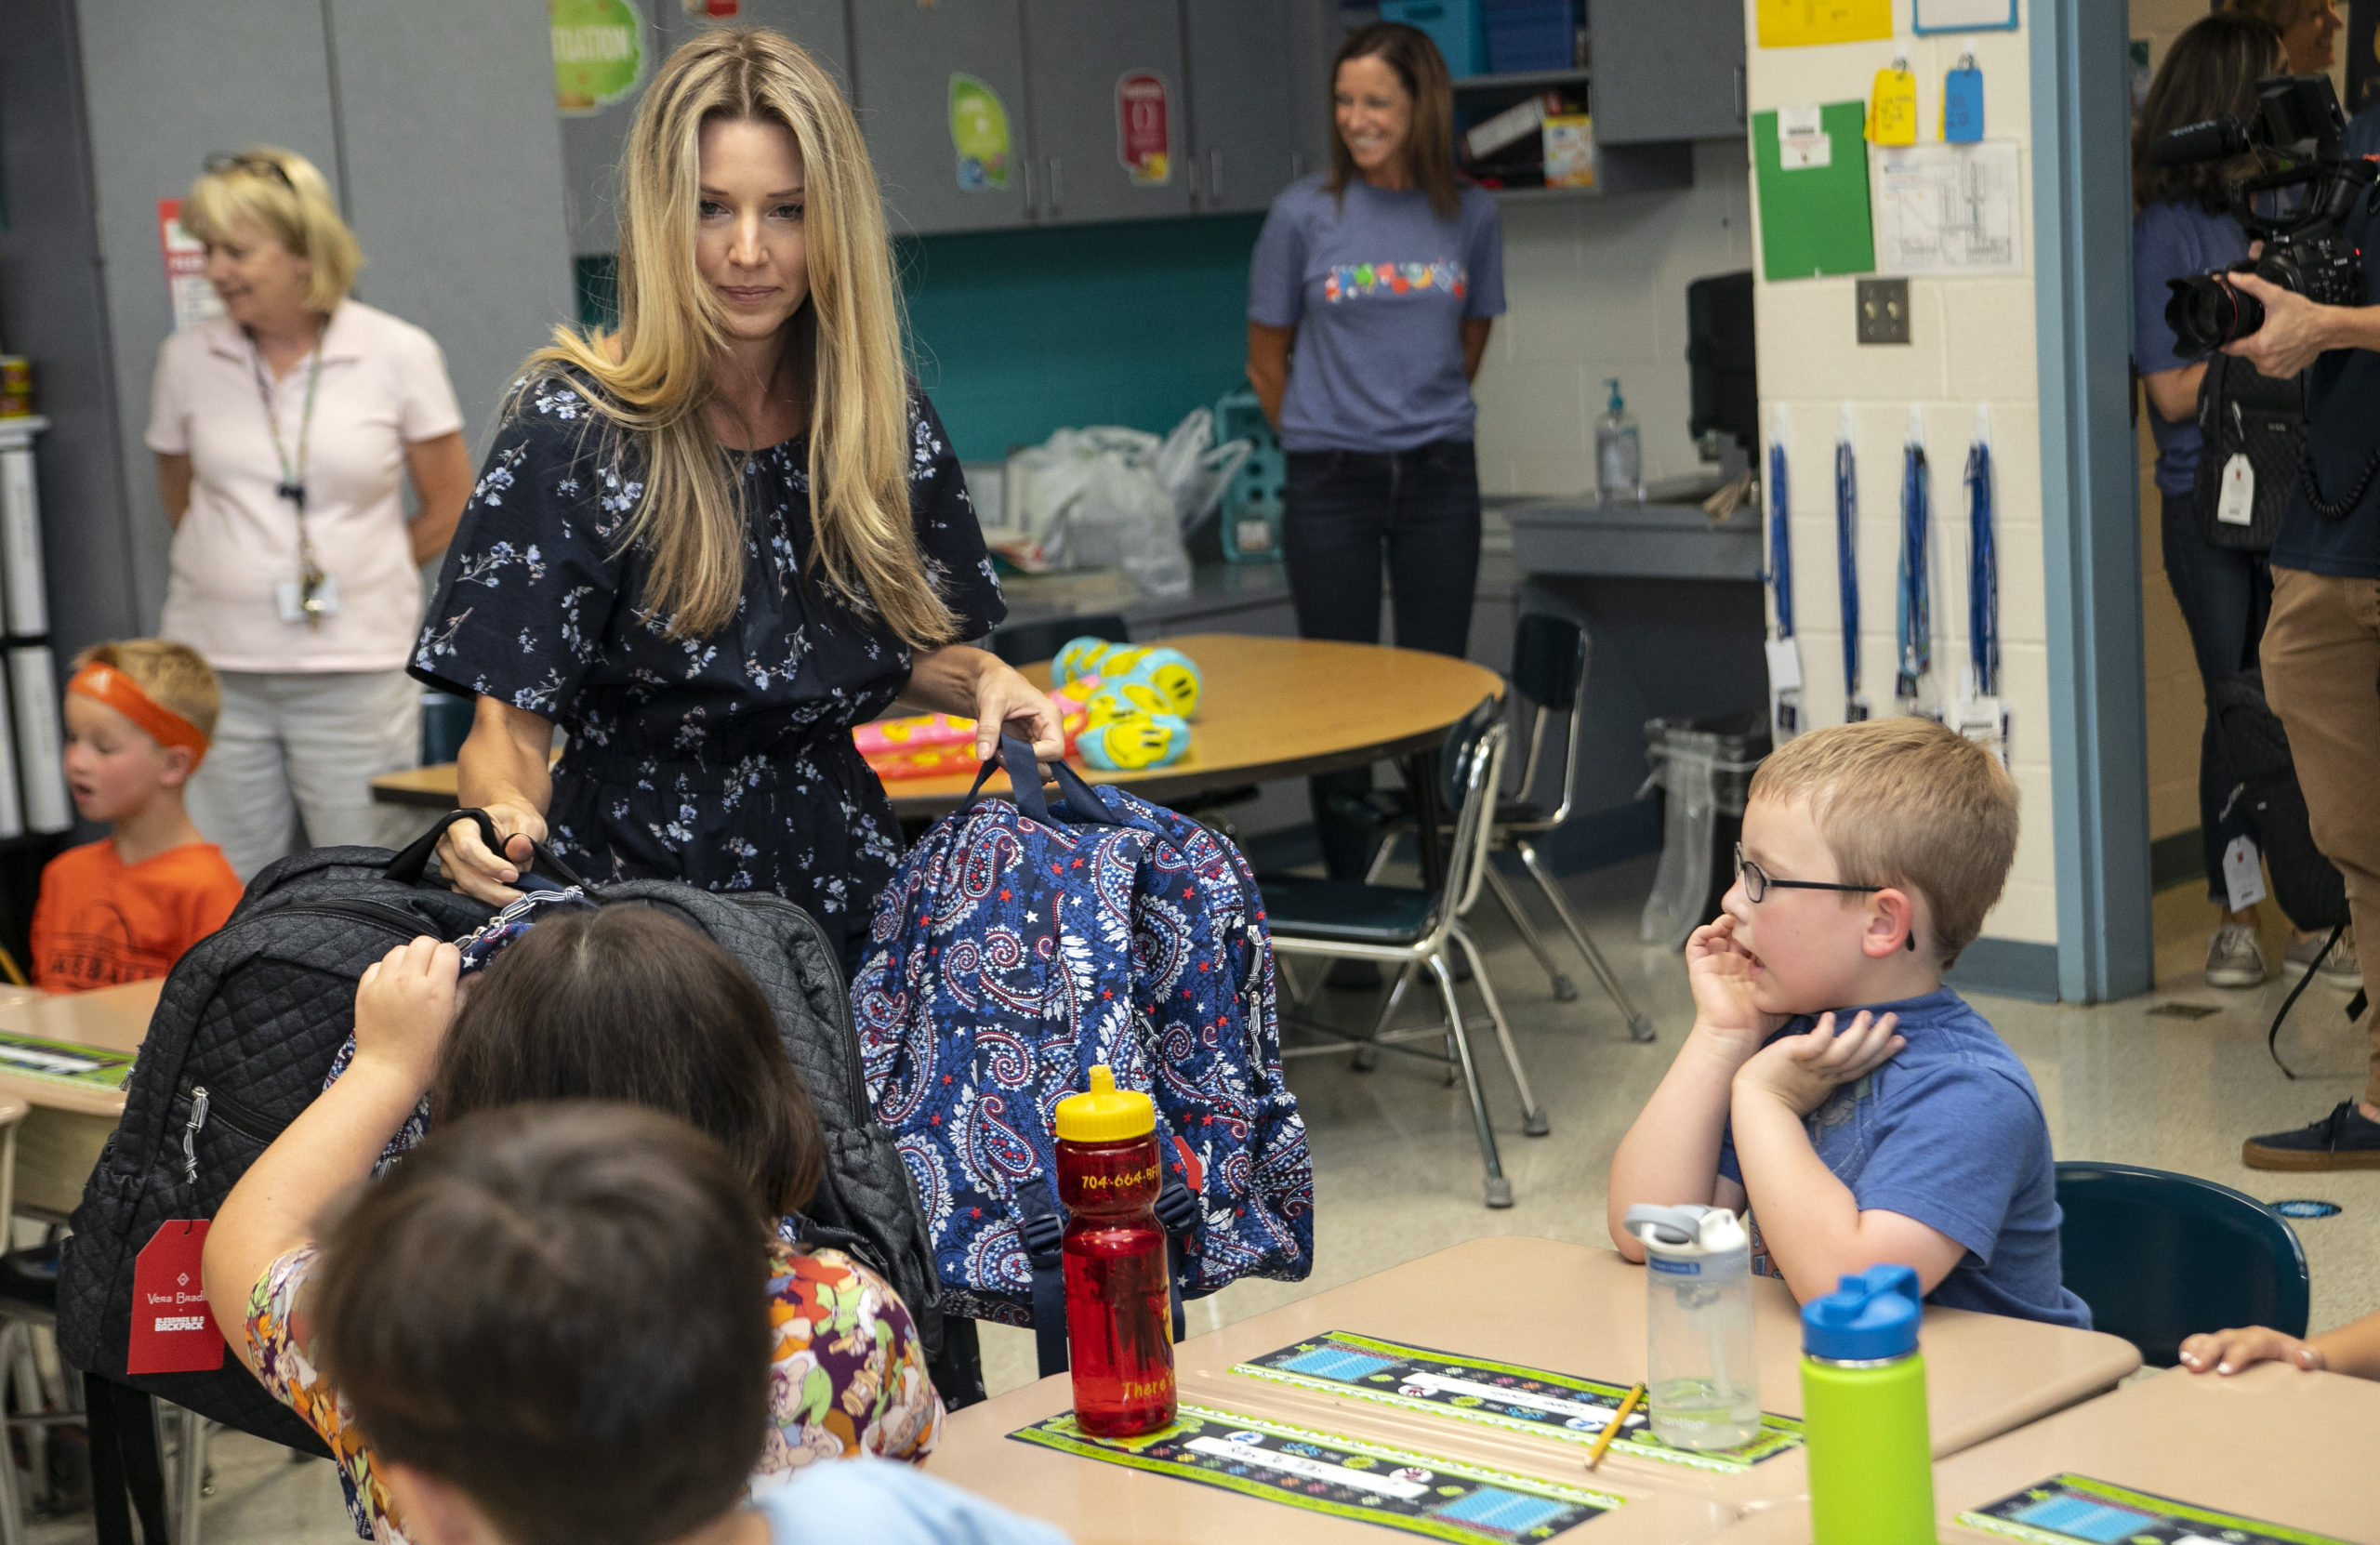 Amy Earnhardt surprises students for the Vera Bradley x Blessings In A Backpack Event at Shepherd Elementary on September 16, 2019 in Mooresville, North Carolina. (Photo by Jeff Hahne/Getty Images for Vera Bradley)